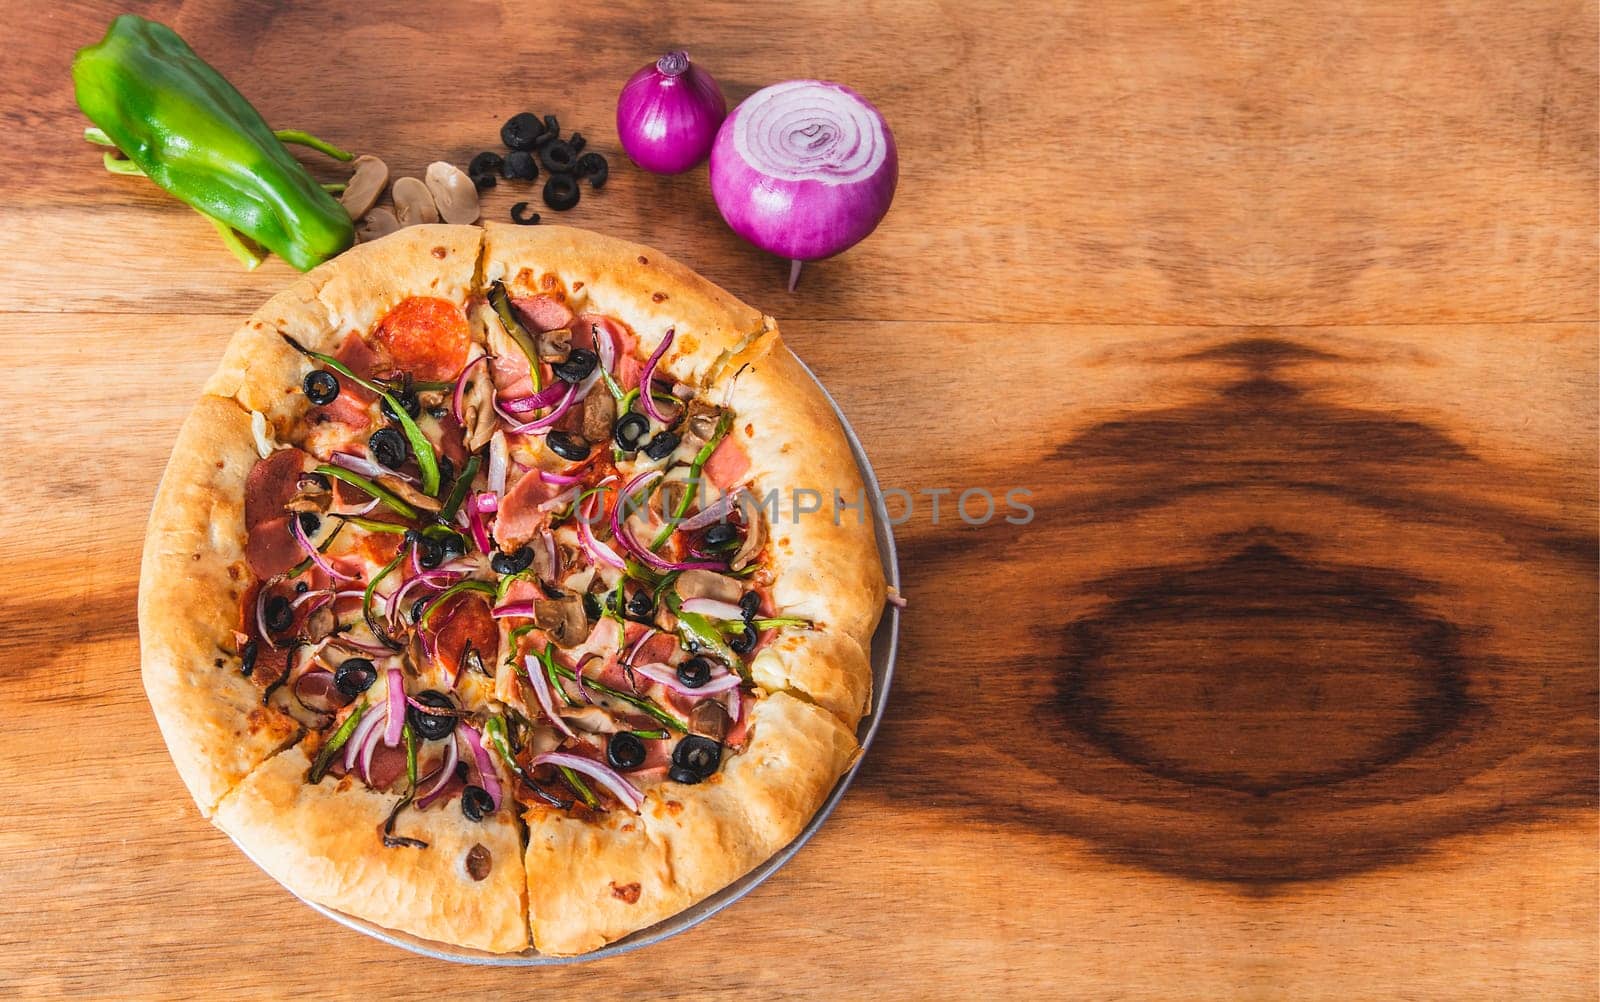 View of supreme pizza with vegetables on wooden background. Top view of supreme pizza with olives and vegetables on wooden table by isaiphoto